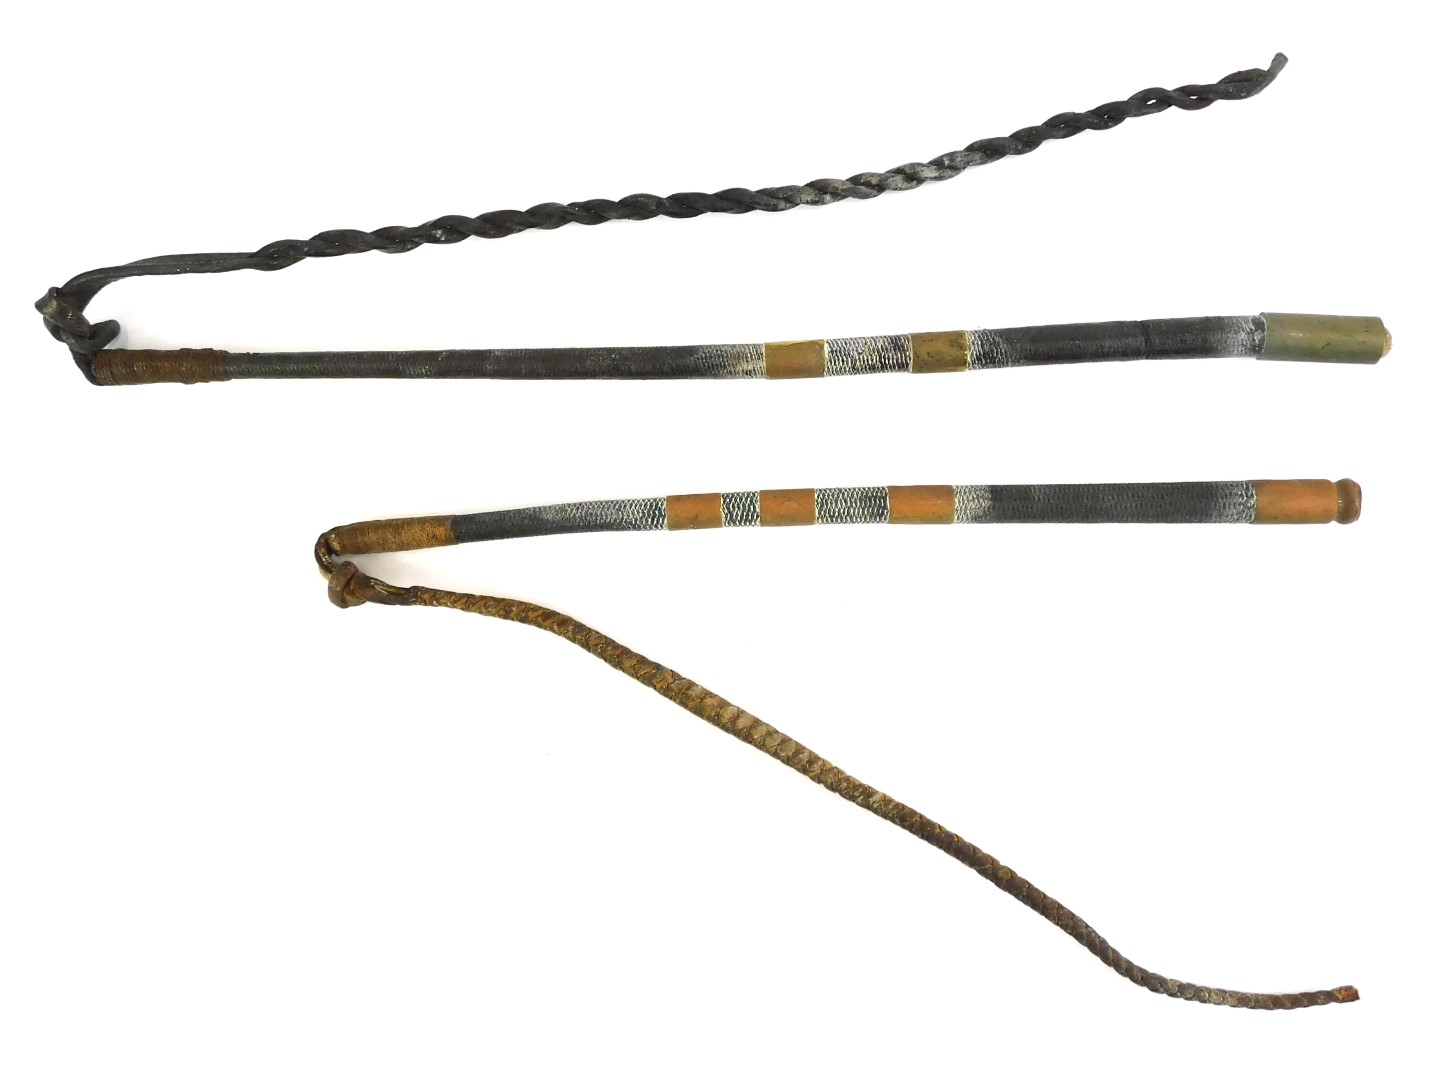 Two similar leather riding whips, each with a leather handle, with copper banding and braided